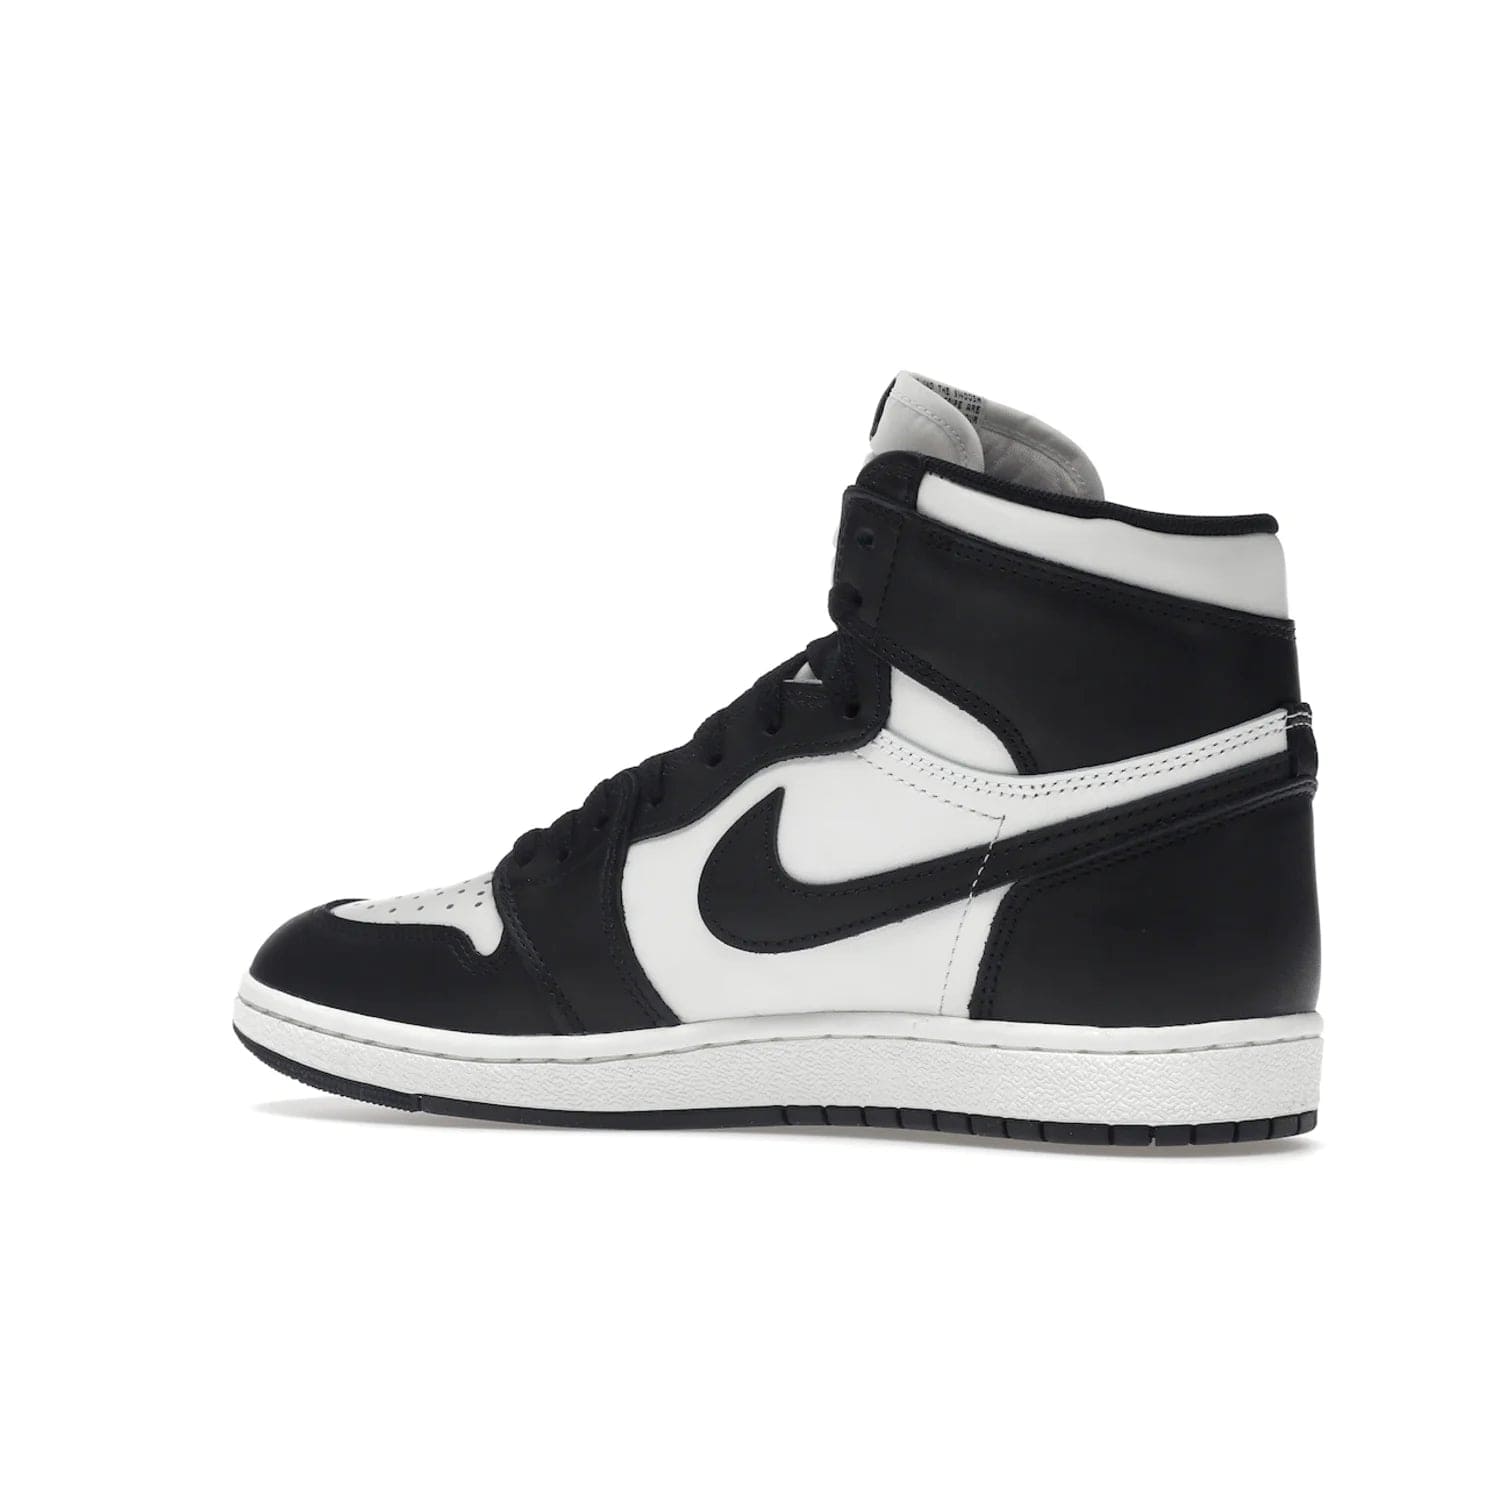 Jordan 1 Retro High 85 Black White (2023) - Image 22 - Only at www.BallersClubKickz.com - Brand new Jordan 1 Retro High 85 Black White (2023) now available. A classic color scheme of black and white leather uppers with signature Nike Air logo on the tongue. Must-have for any Air Jordan fan. Available February 15, 2023.